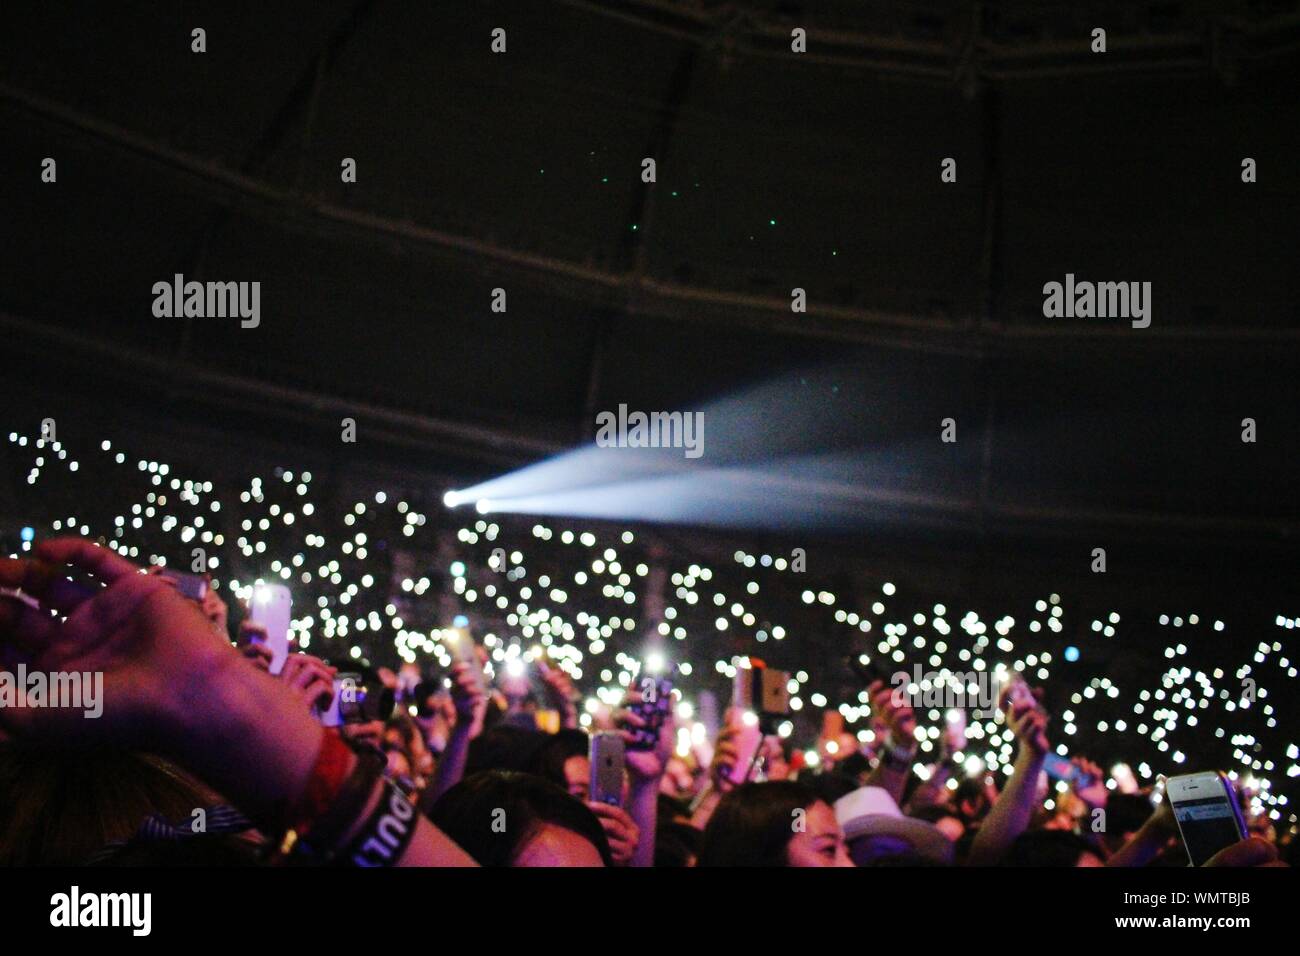 Crowd Holding Up Cell Phones To Record Musical Performance Stock Photo